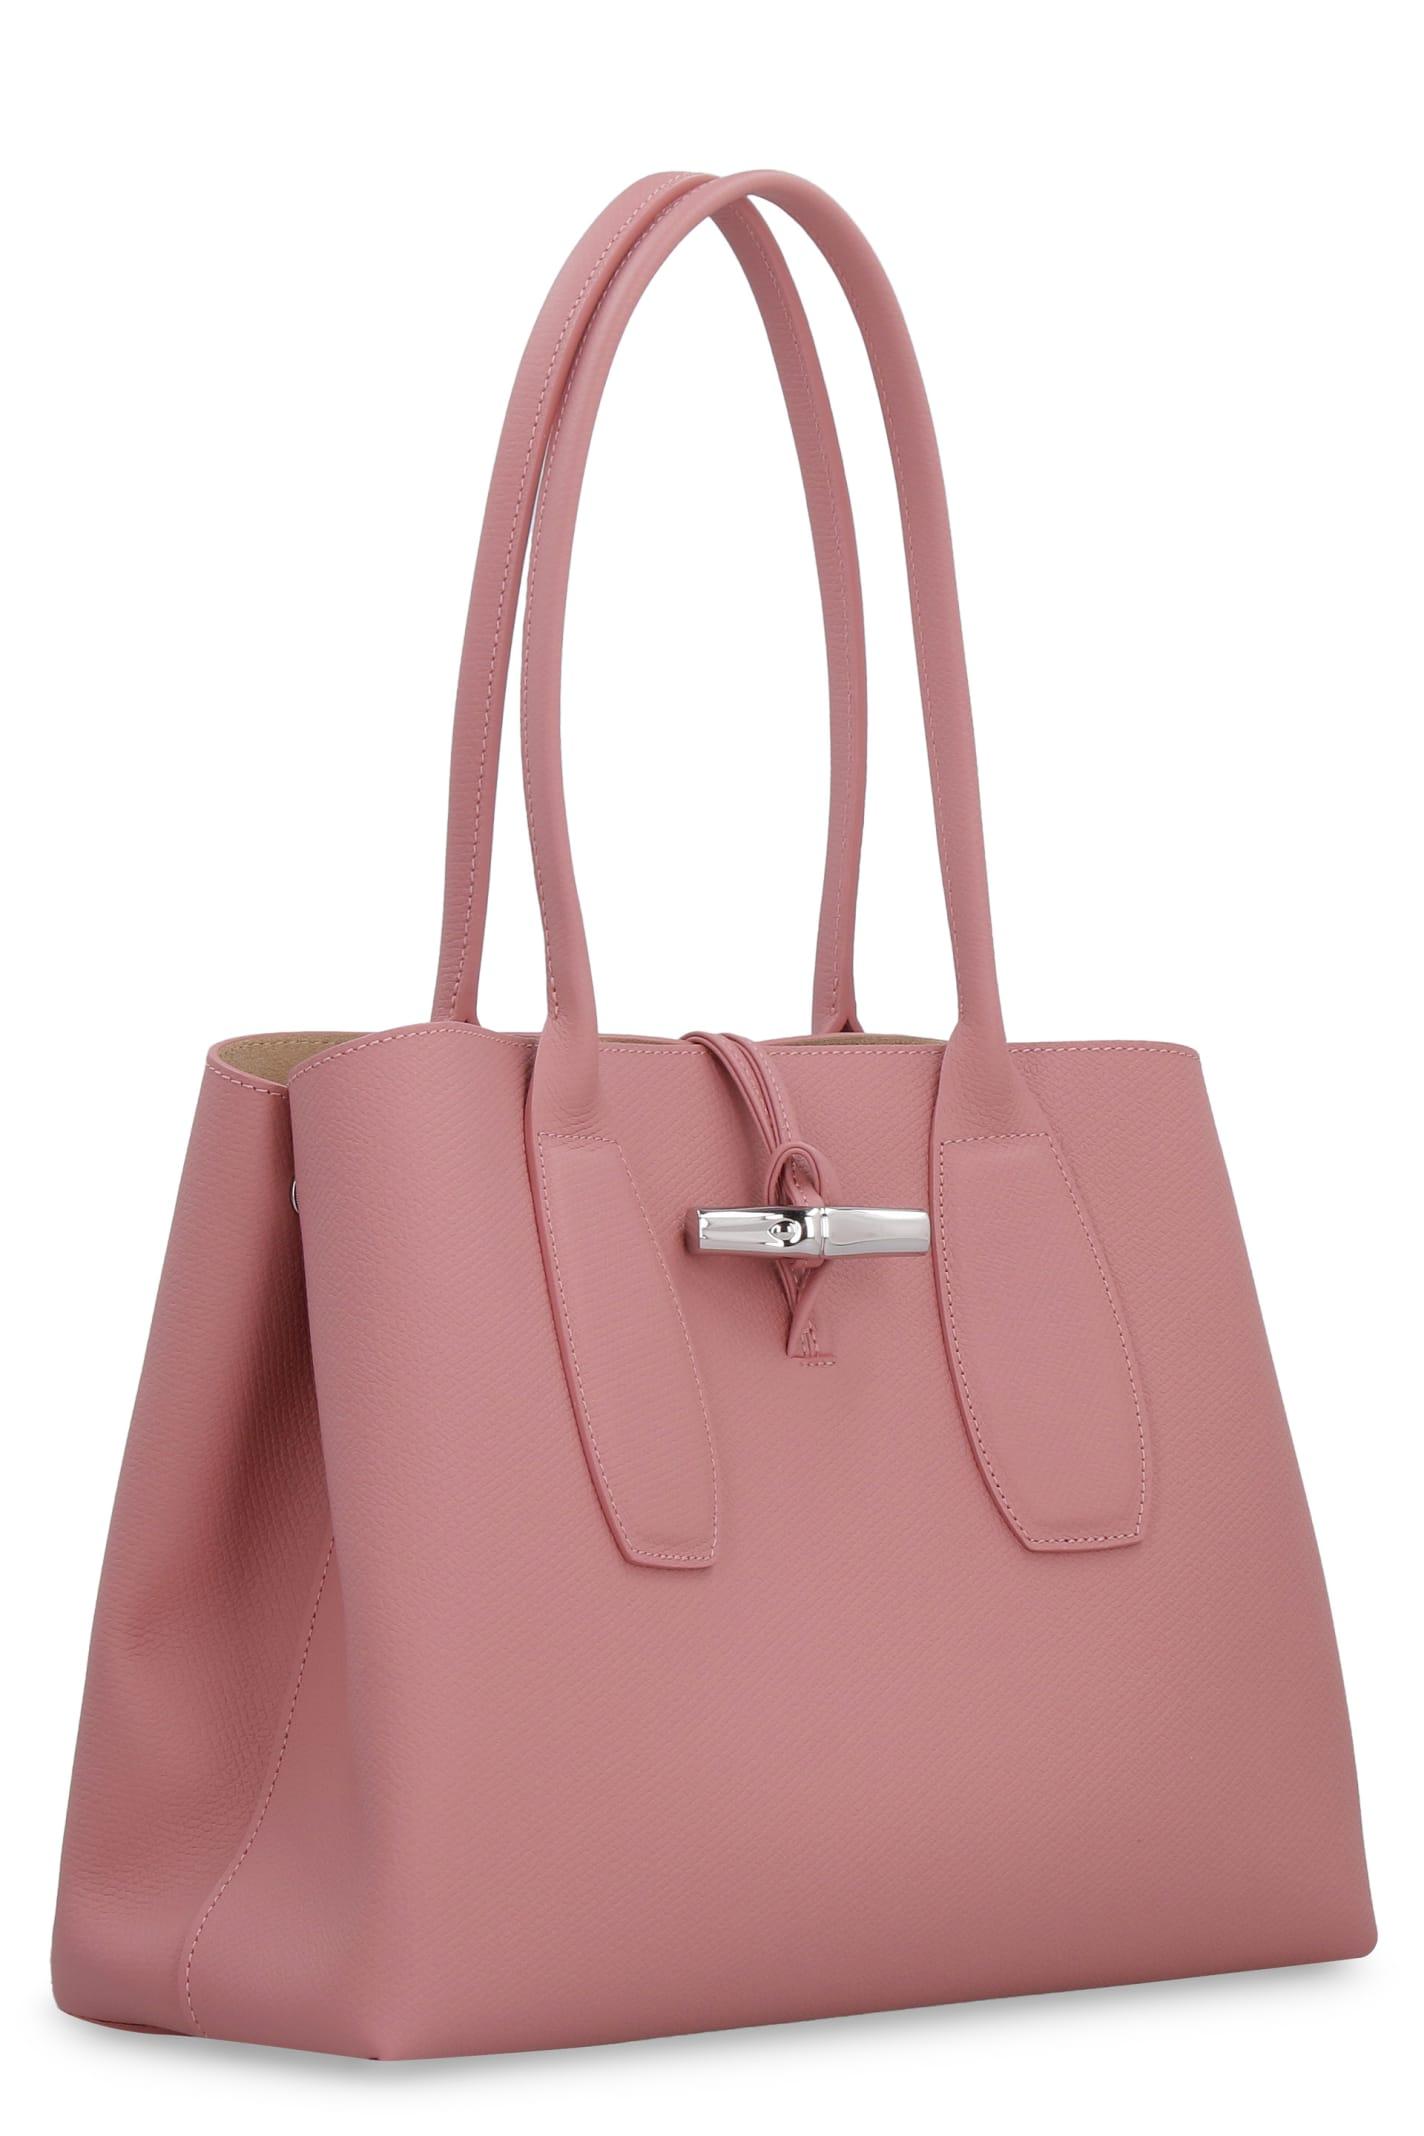 Longchamp Small Roseau Leather Tote Bag In Pink